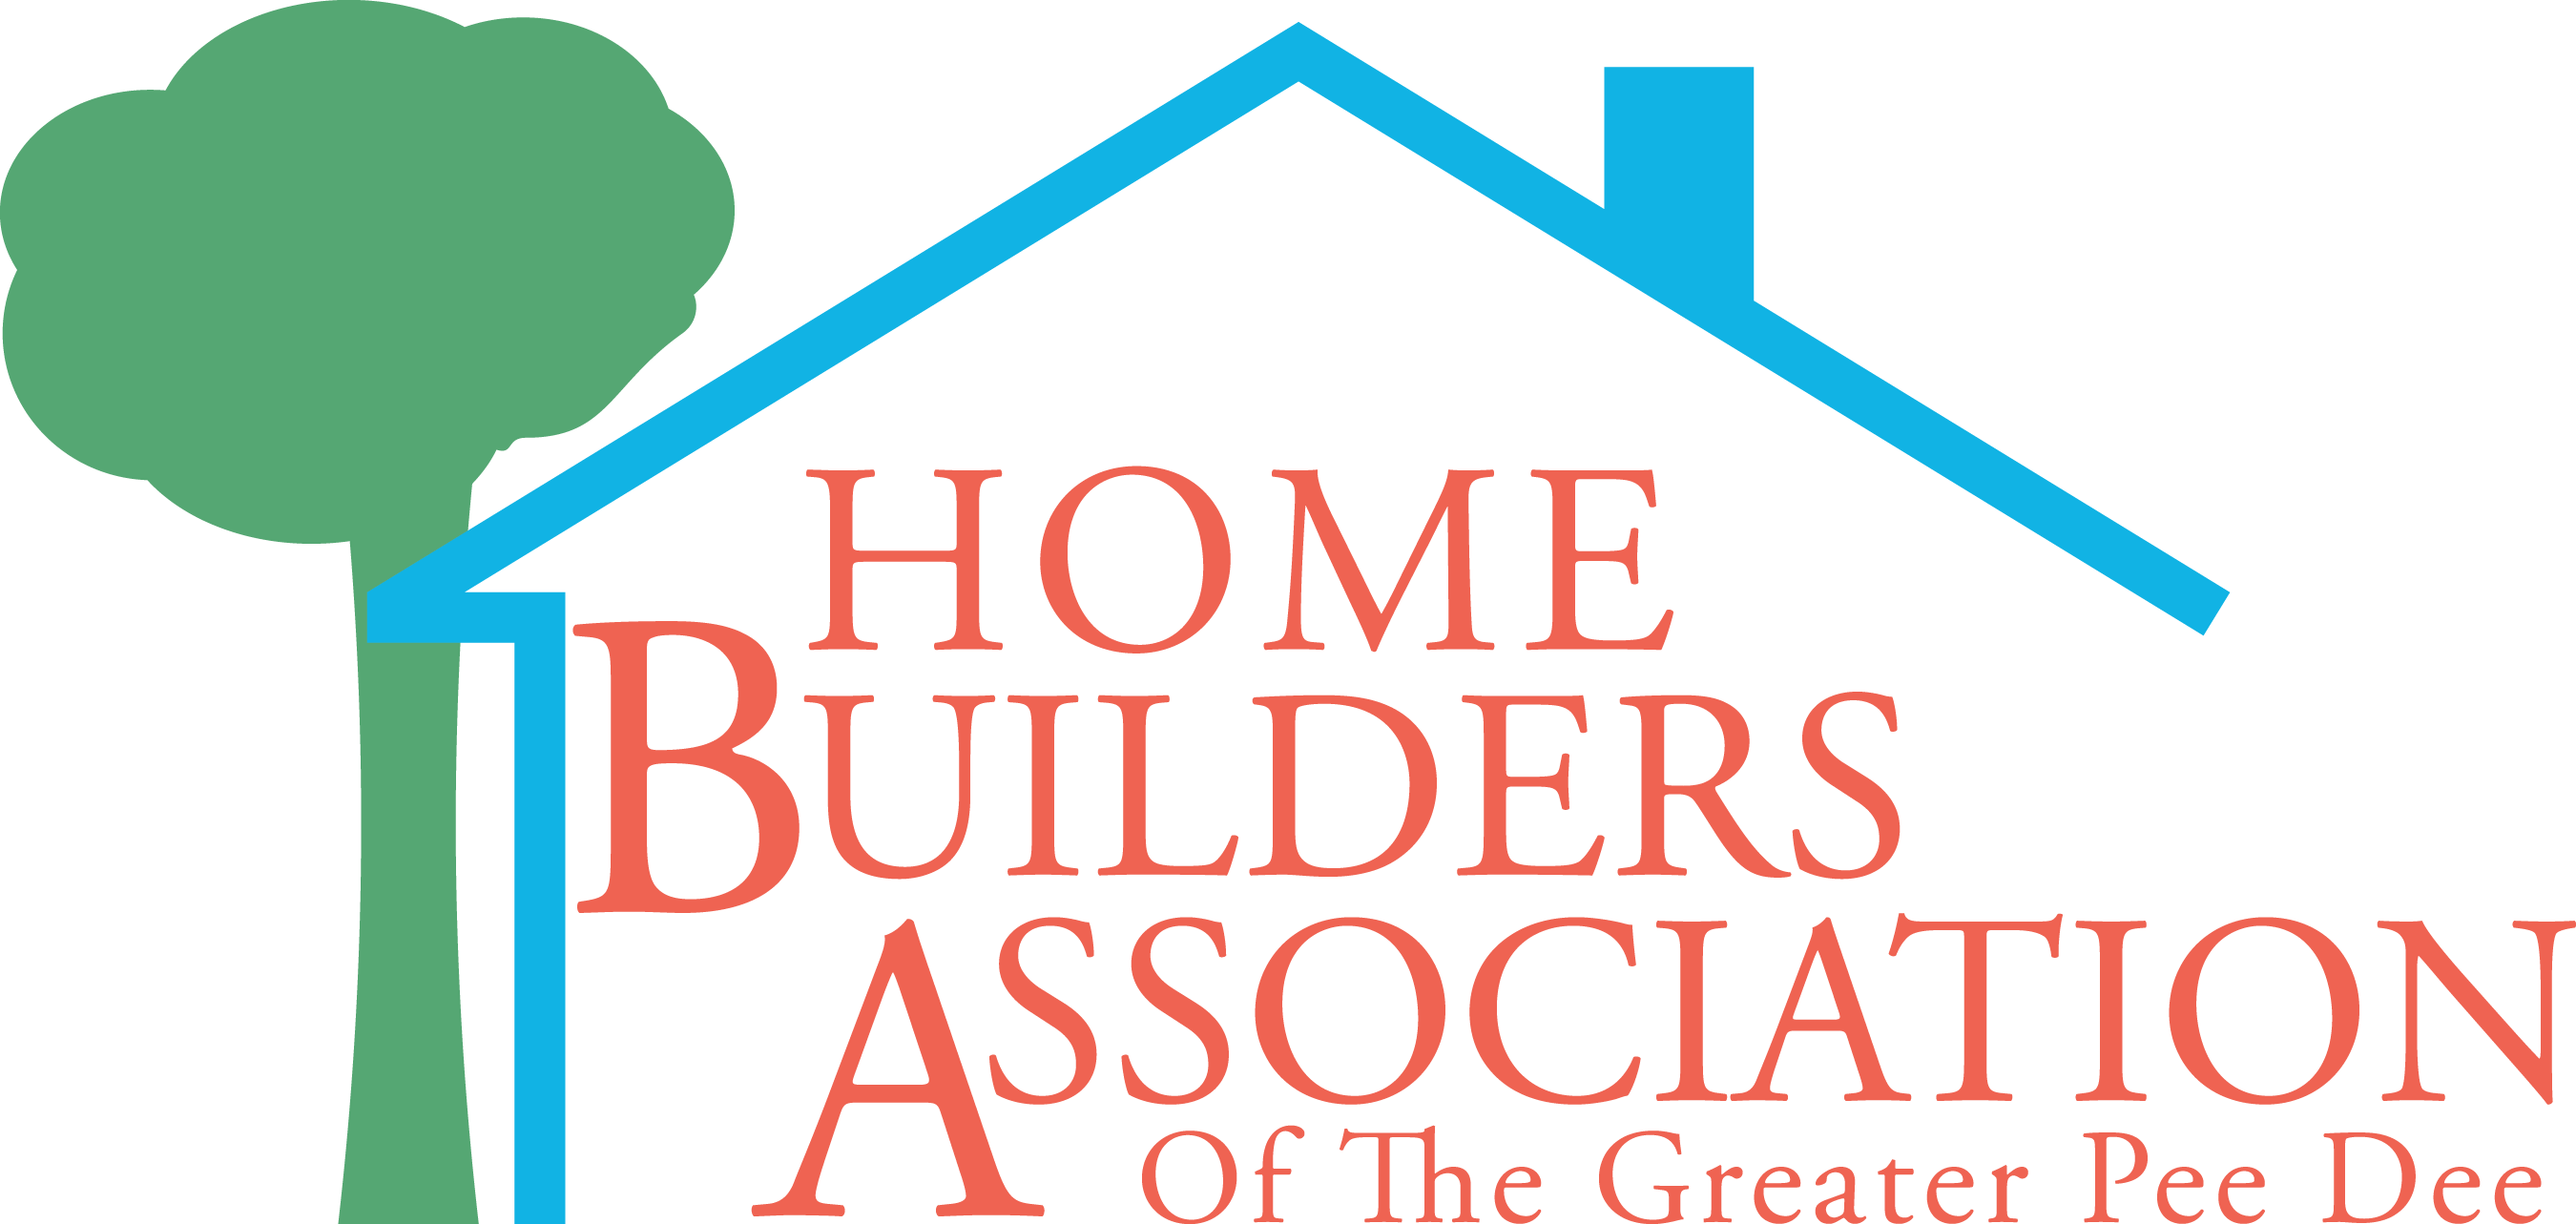 Home Builders Assosciation of the Greater Pee Dee